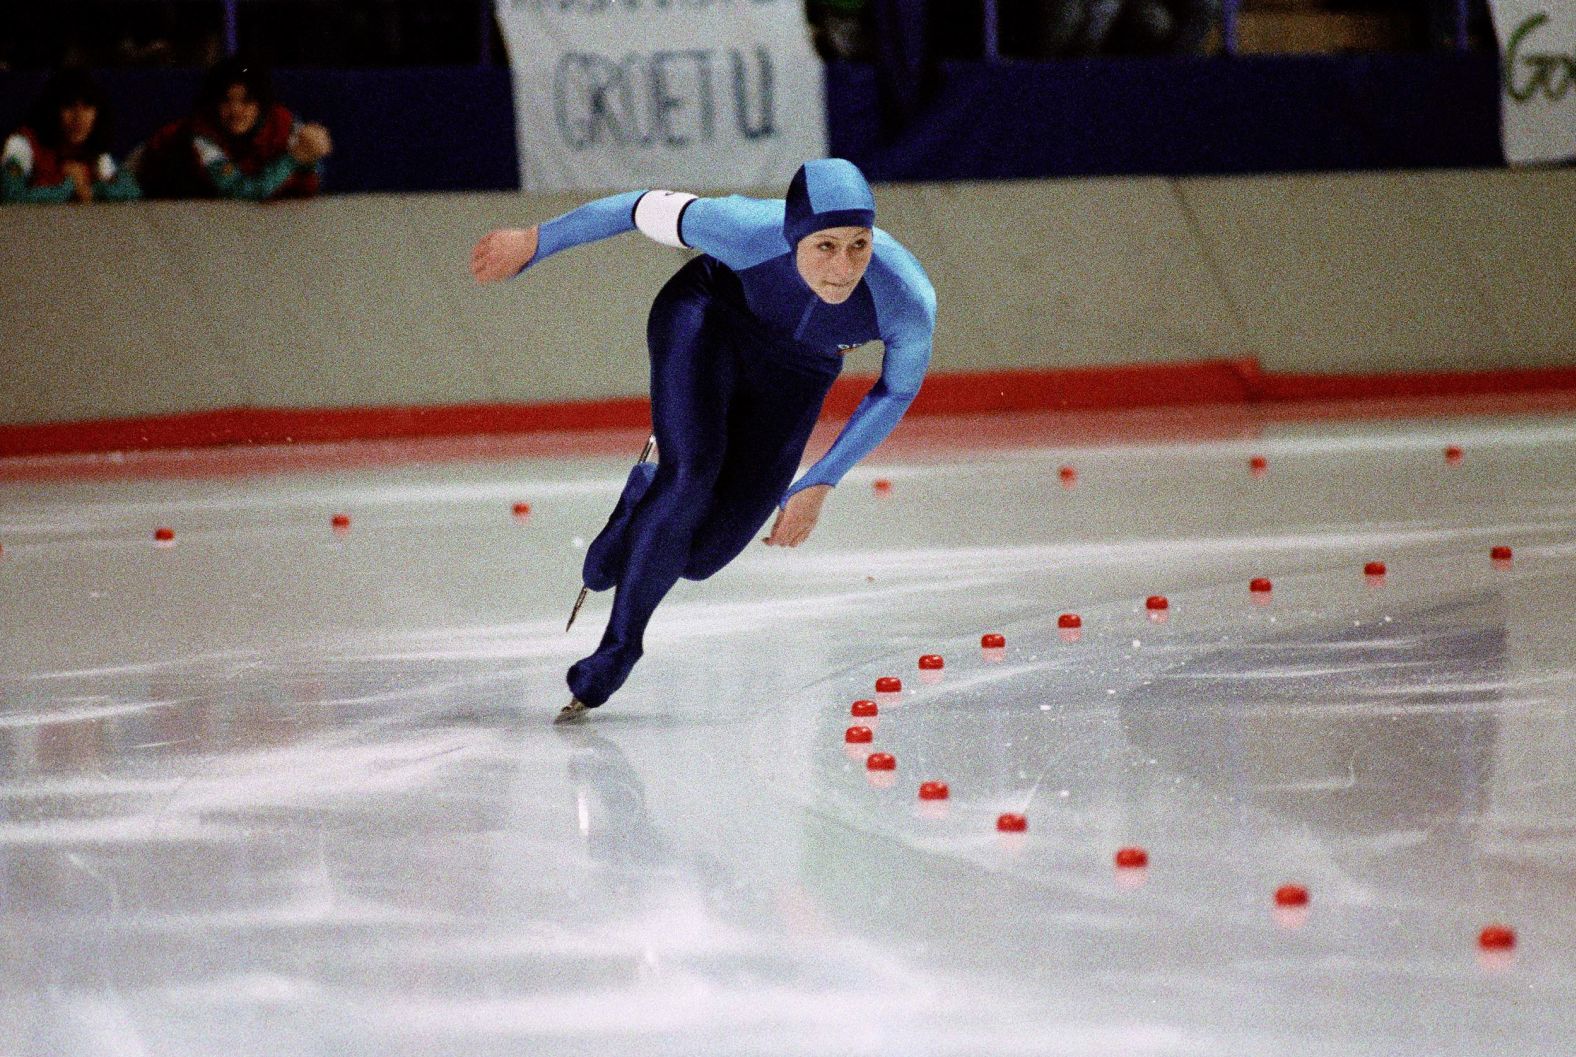 Christa Luding-Rothenburger is the only Olympian to medal in a summer and winter event in the same year. In 1988, while competing for East Germany, she won a gold and a silver in speed skating.